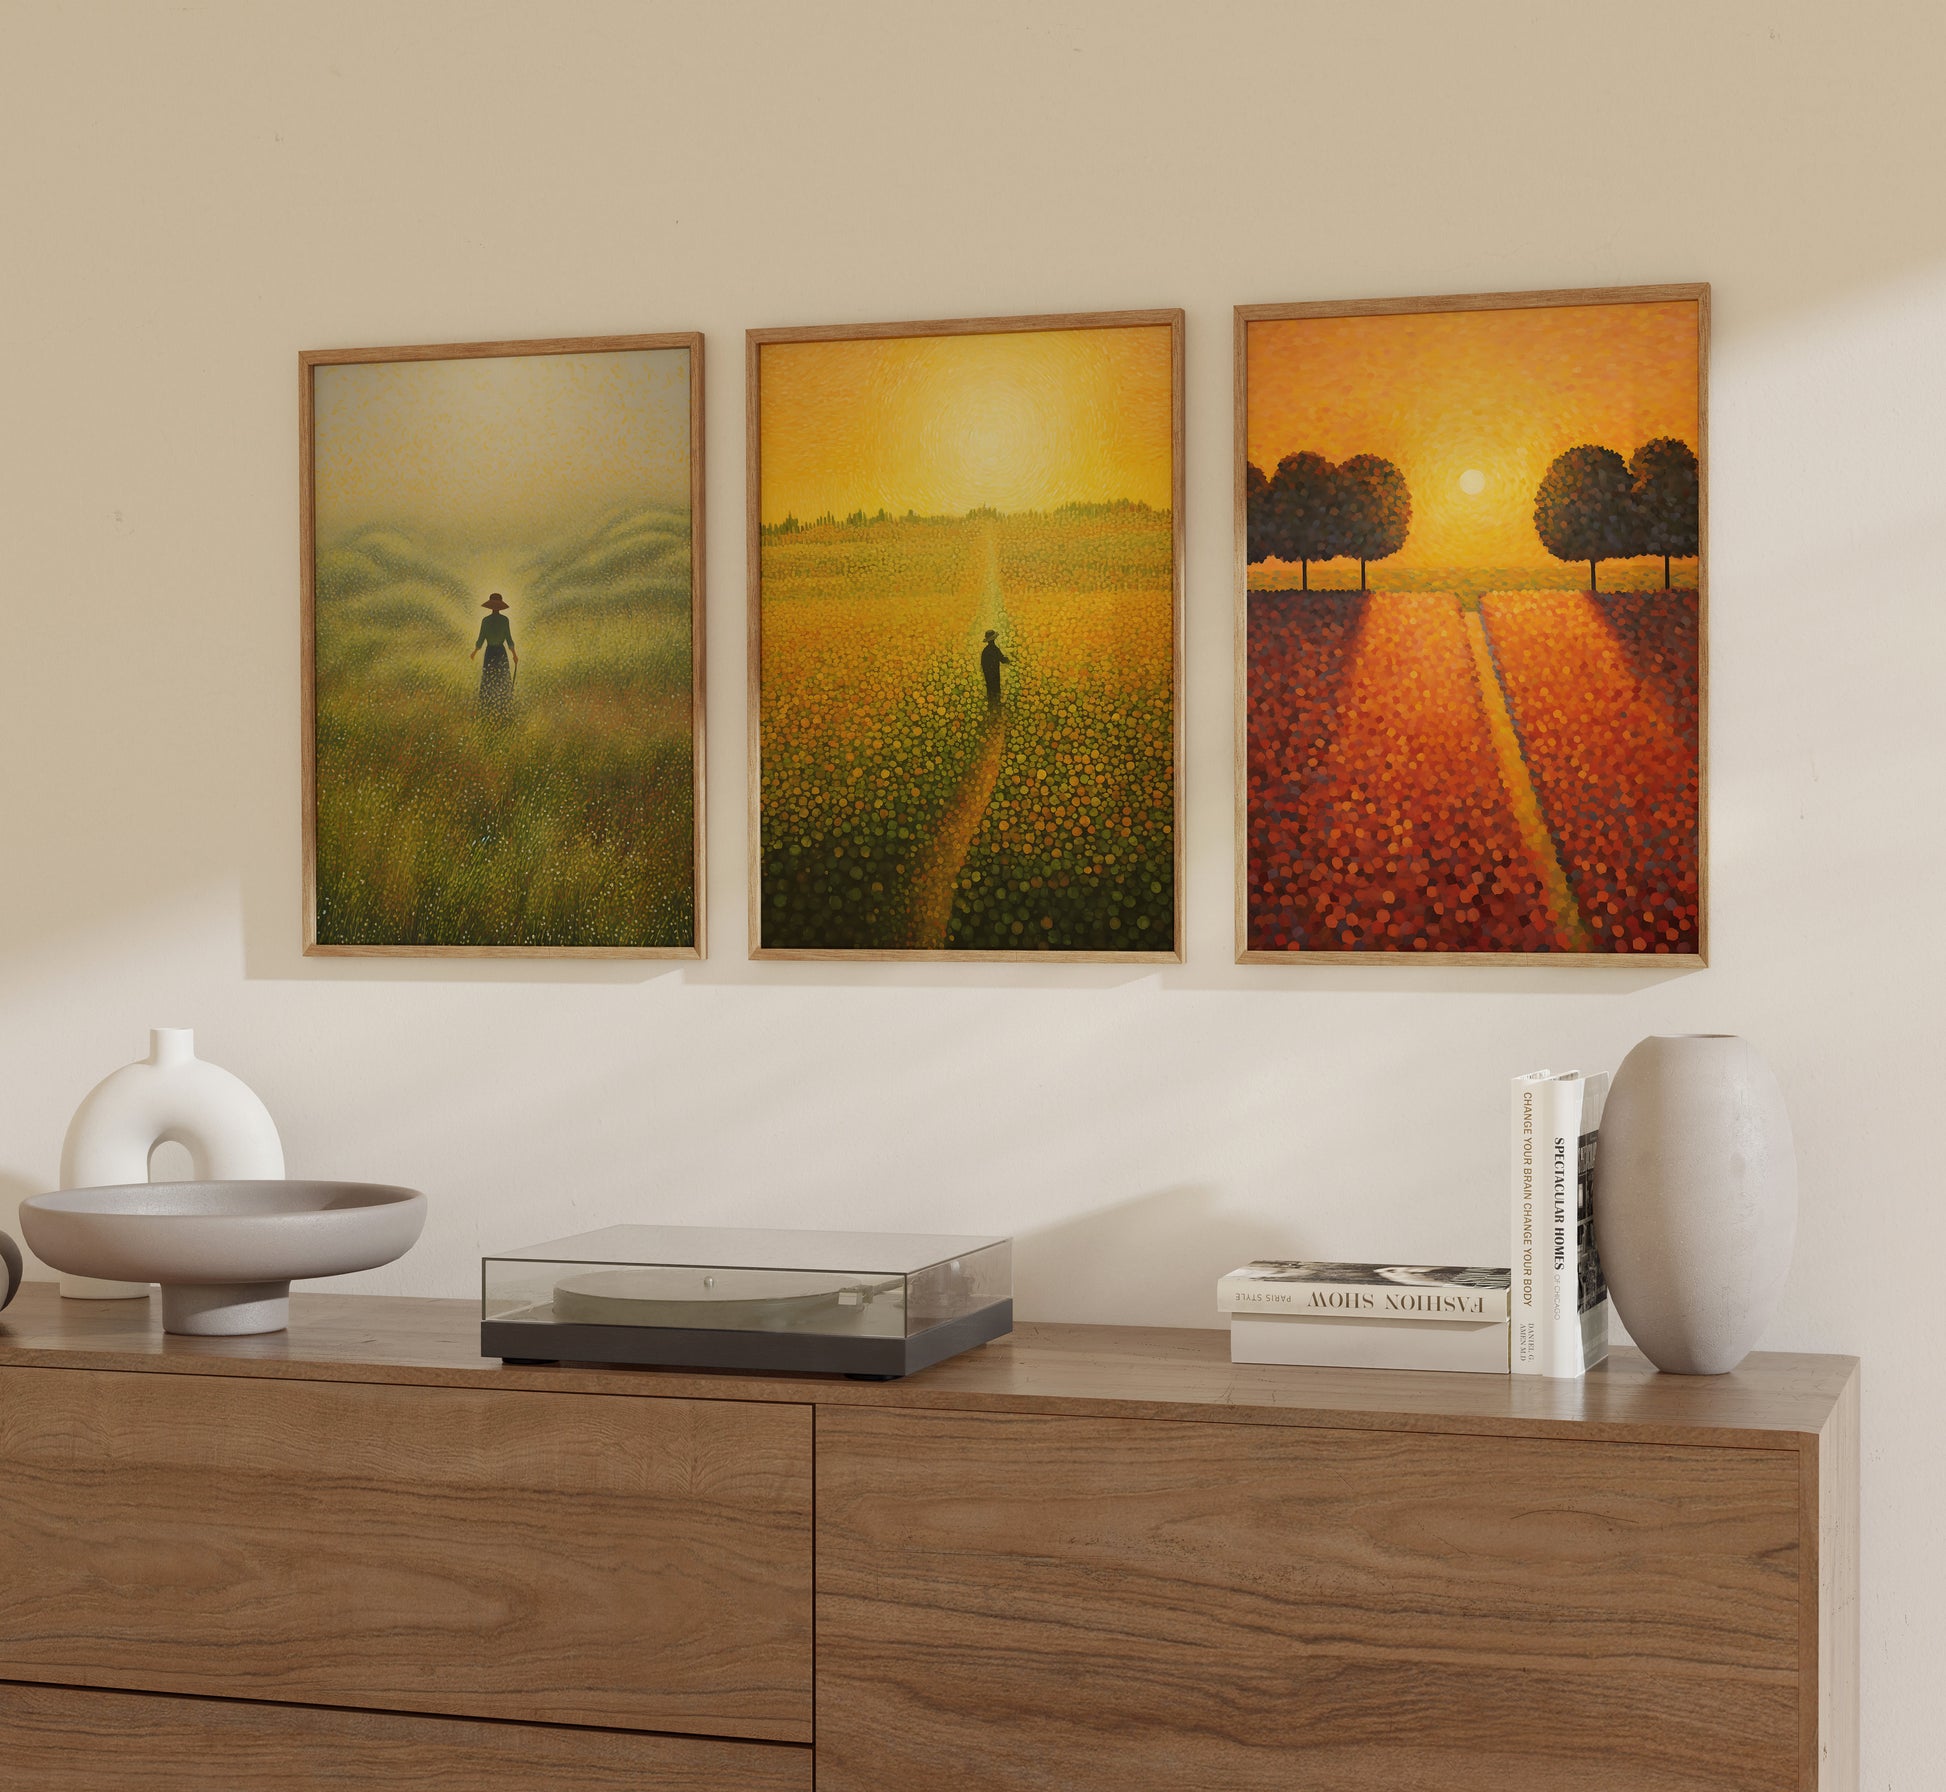 Three landscape paintings on a wall depicting sunlit fields and trees.